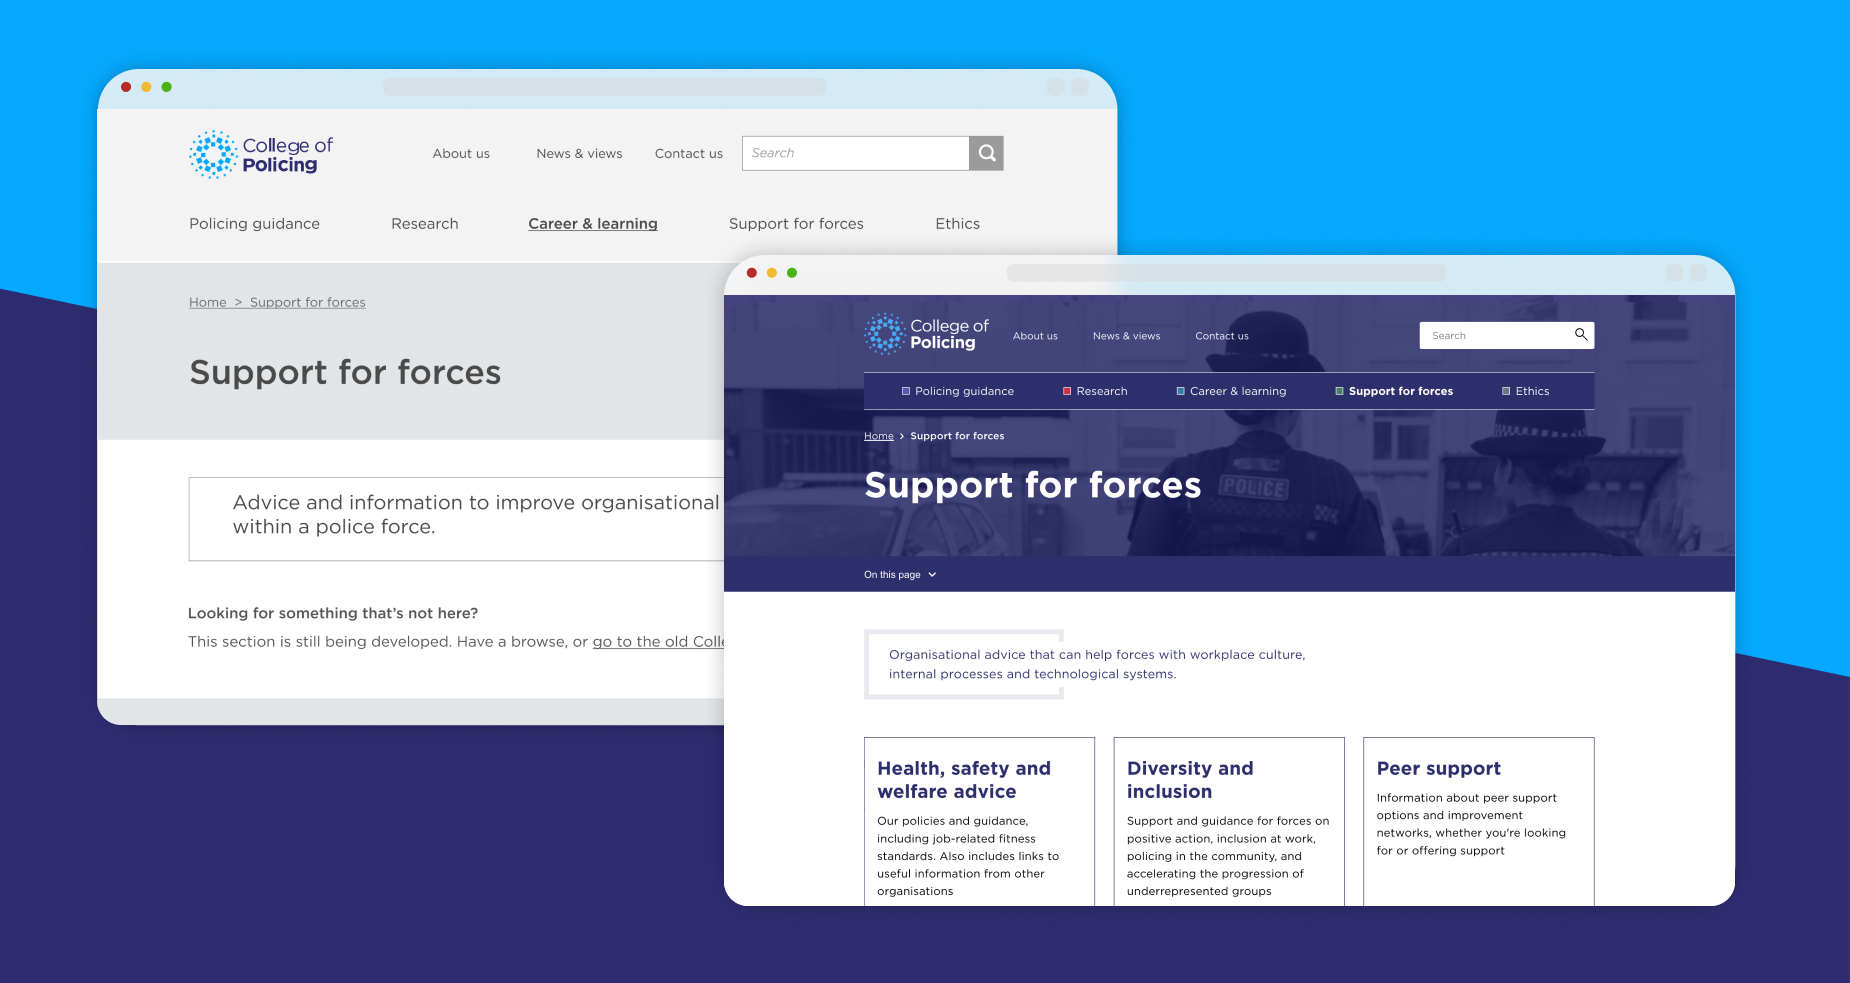 Screenshots of the "Support for Forces" page from the College of Policing website.